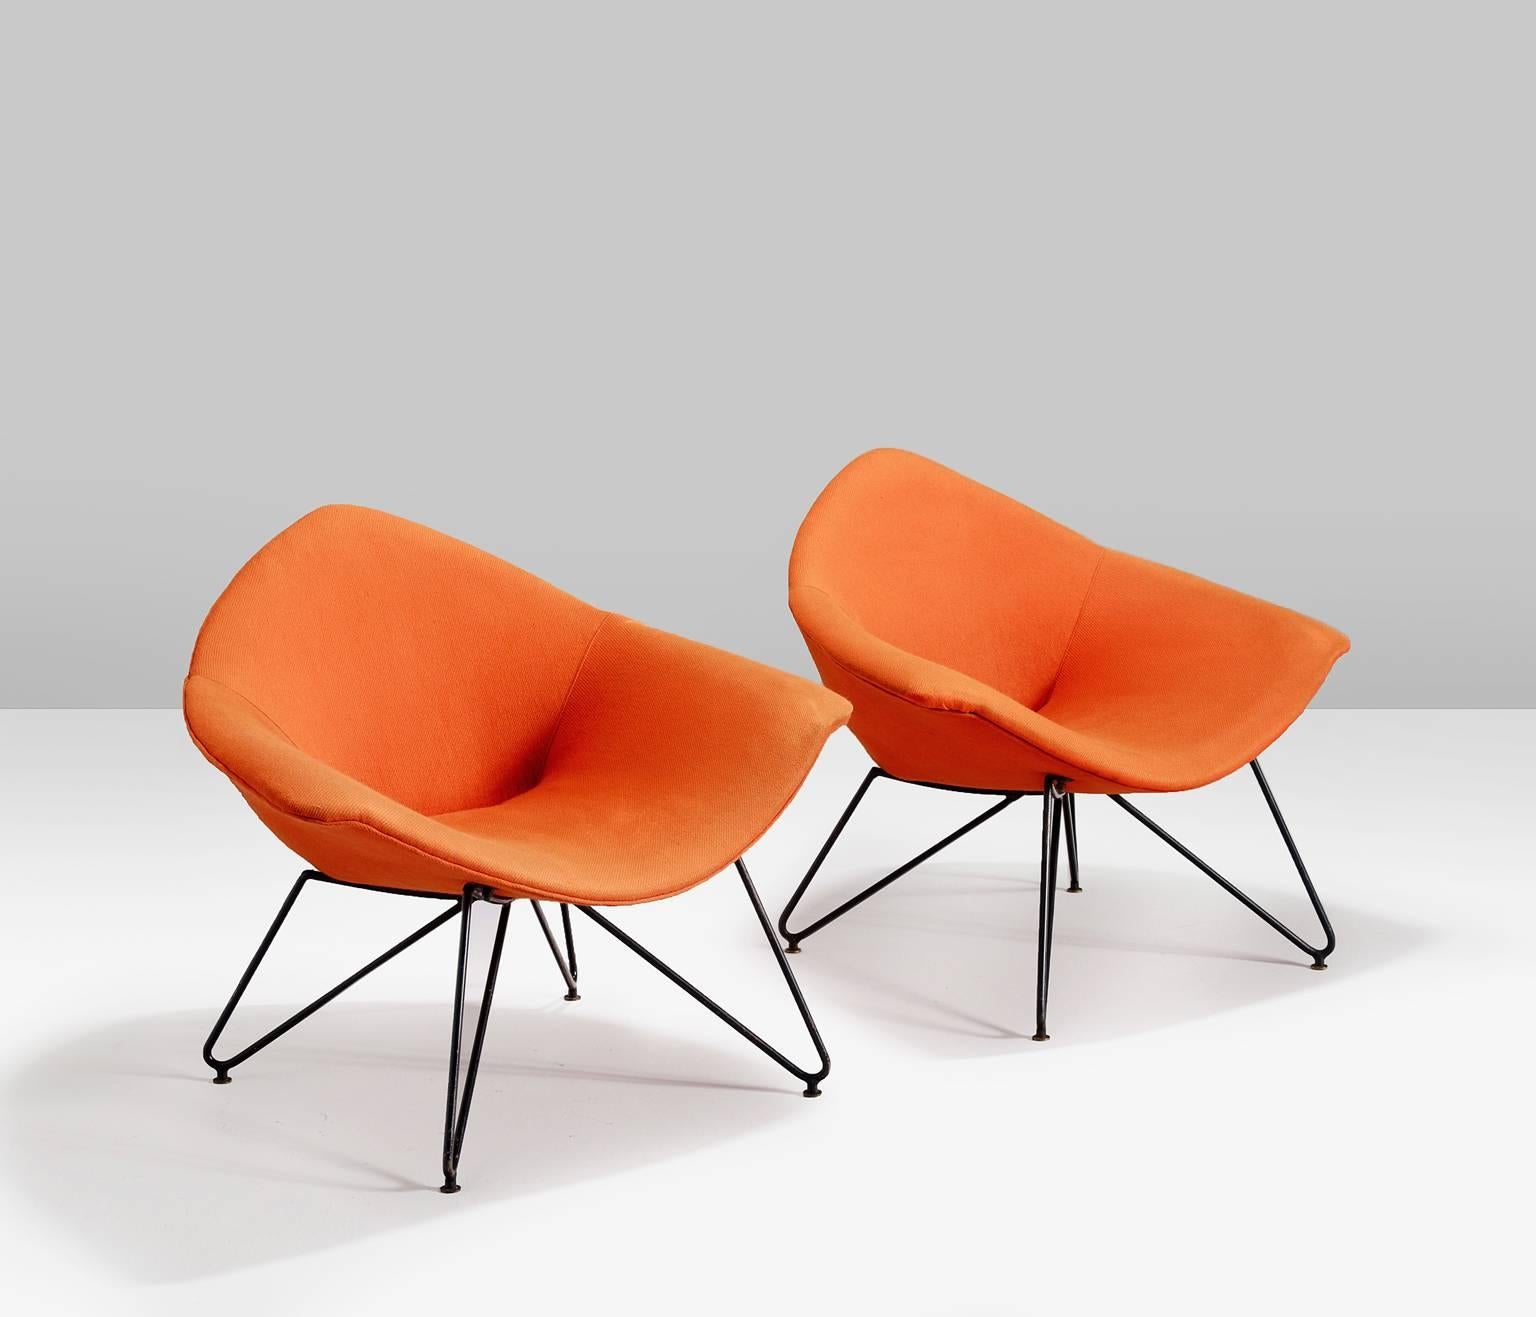 Pair of armchairs by Sergio and Giorgio Saporiti, Model 'Golden', Italy, 1958s.

Spectacular pair of lounge chairs with an elegant design, suited with a black metal frame. The great proportions and friendly feel of the chairs, characterize the